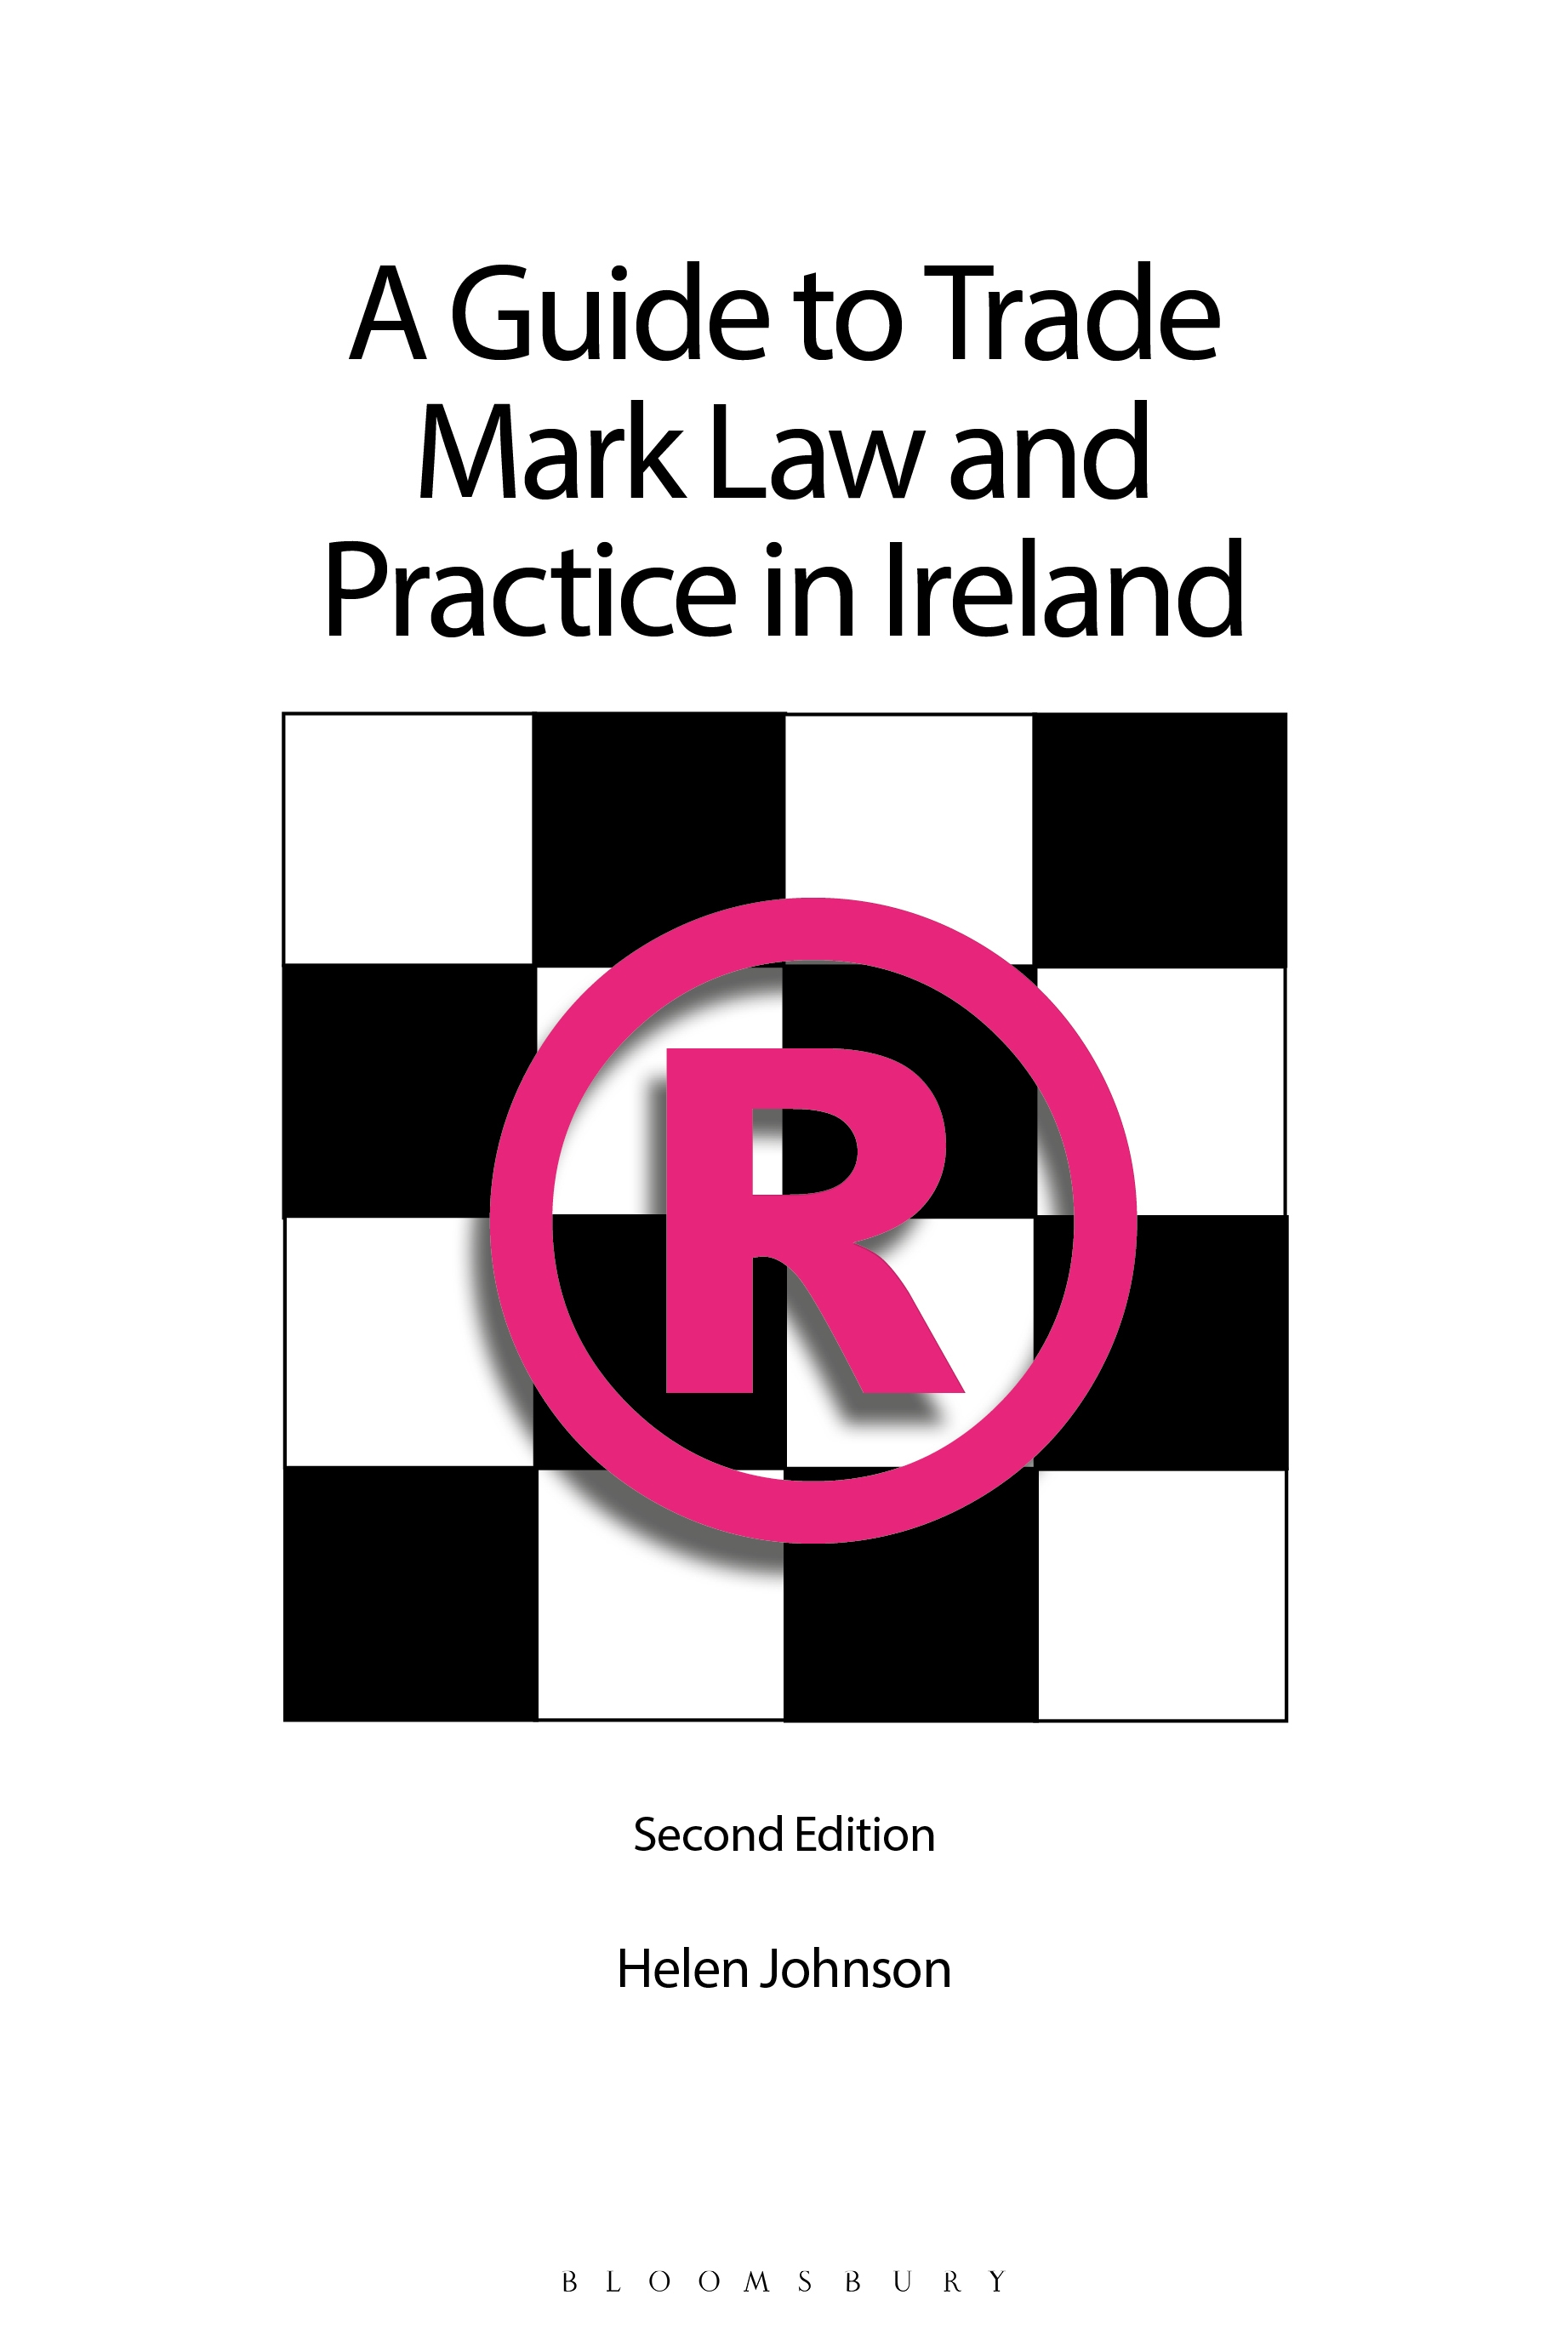 Guide to Trade Mark Law and Practice in Ireland book jacket